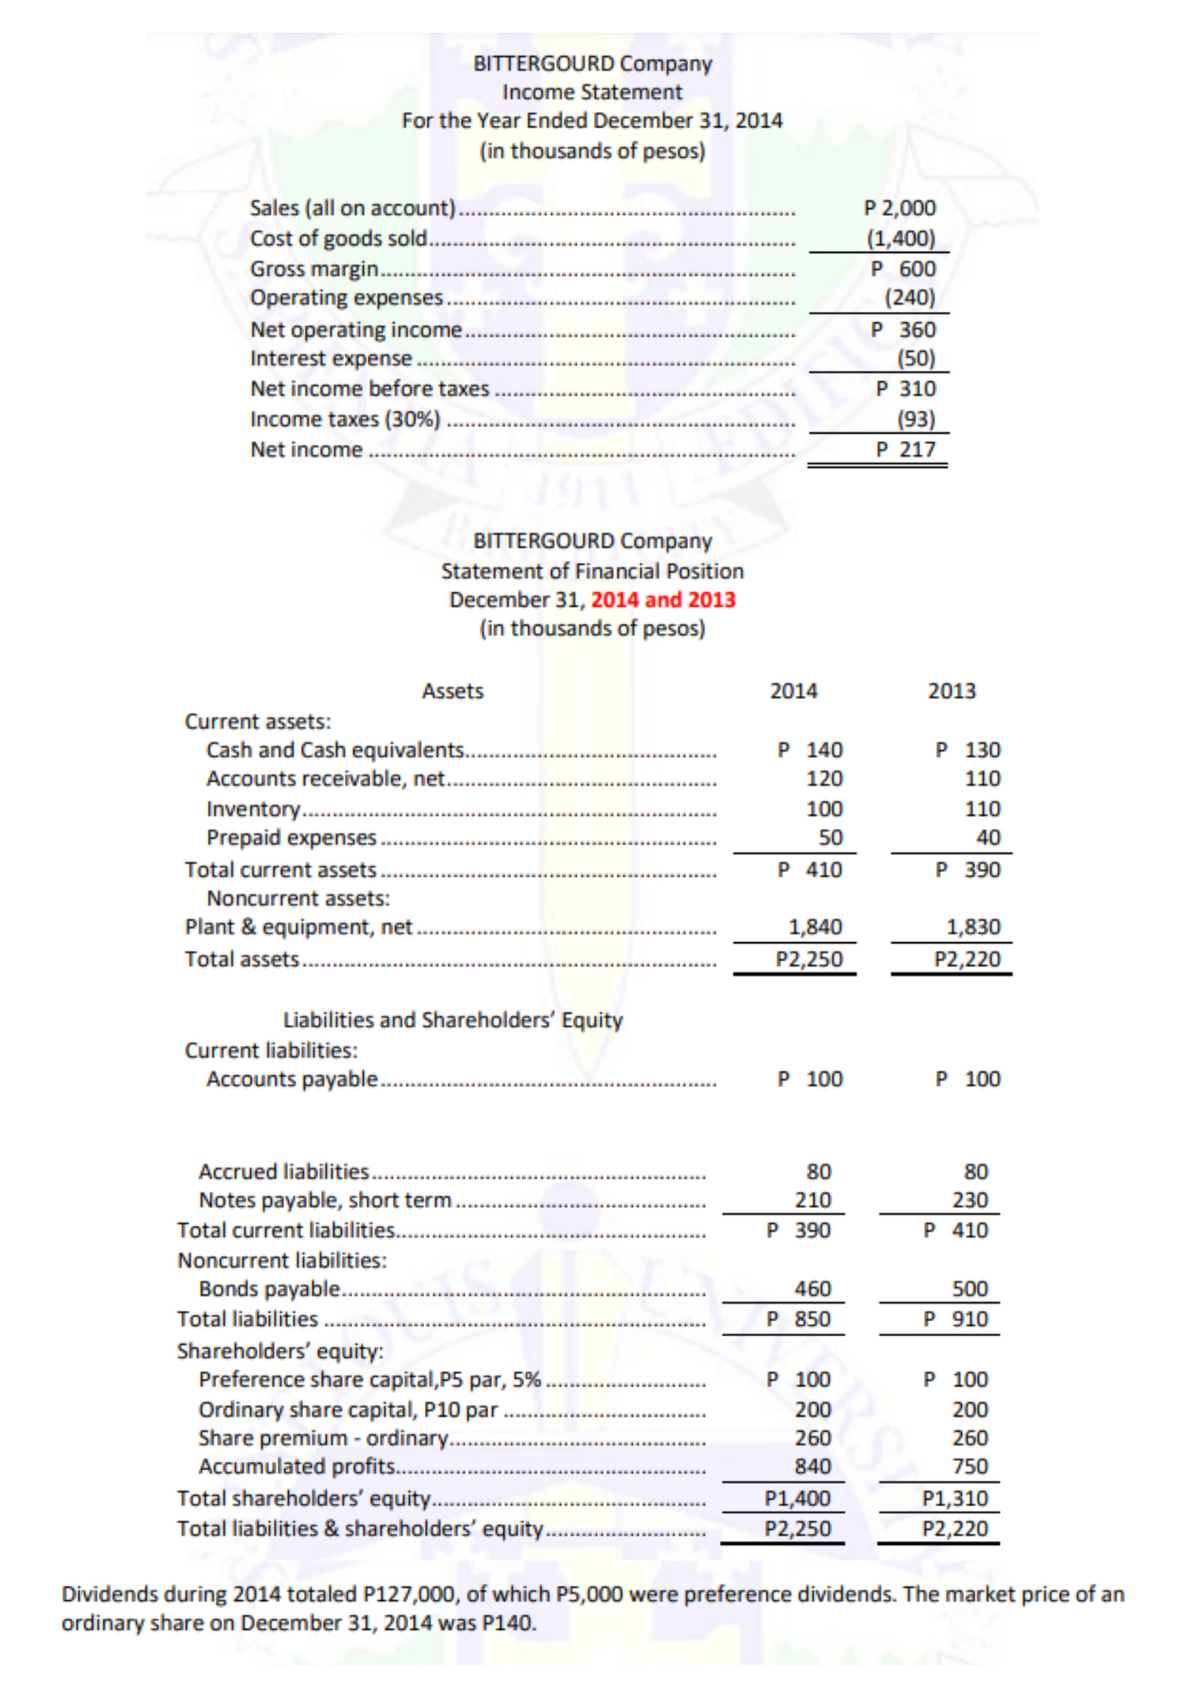 BITTERGOURD Company
Income Statement
For the Year Ended December 31, 2014
(in thousands of pesos)
P 2,000
(1,400)
P 600
(240)
Р 360
(50)
P 310
(93)
P 217
Sales (all on account).
Cost of goods sold..
Gross margin..
Operating expenses..
Net operating income..
Interest expense.
Net income before taxes.
Income taxes (30%)..
Net income.
BITTERGOURD Company
Statement of Financial Position
December 31, 2014 and 2013
(in thousands of pesos)
Assets
2014
2013
Current assets:
Р 140
Р 130
Cash and Cash equivalents..
Accounts receivable, net.
120
110
110
Inventory..
Prepaid expenses.
100
50
40
Total current assets.
P 410
P 390
Noncurrent assets:
Plant & equipment, net.
1,840
1,830
Total assets..
P2,250
P2,220
Liabilities and Shareholders' Equity
Current liabilities:
Accounts payable.
P 100
P 100
Accrued liabilities.
Notes payable, short term.
80
80
210
P 390
230
Total current liabilities..
P 410
Noncurrent liabilities:
Bonds payable .
460
500
Total liabilities .
P 850
P 910
Shareholders' equity:
Preference share capital,P5 par, 5%.
Ordinary share capital, P10 par
Share premium - ordinary..
Accumulated profits.
Total shareholders' equity..
Total liabilities & shareholders' equity.
Р 100
P 100
200
200
260
260
840
750
P1,400
P2,250
P1,310
P2,220
Dividends during 2014 totaled P127,000, of which P5,000 were preference dividends. The market price of an
ordinary share on December 31, 2014 was P140.
